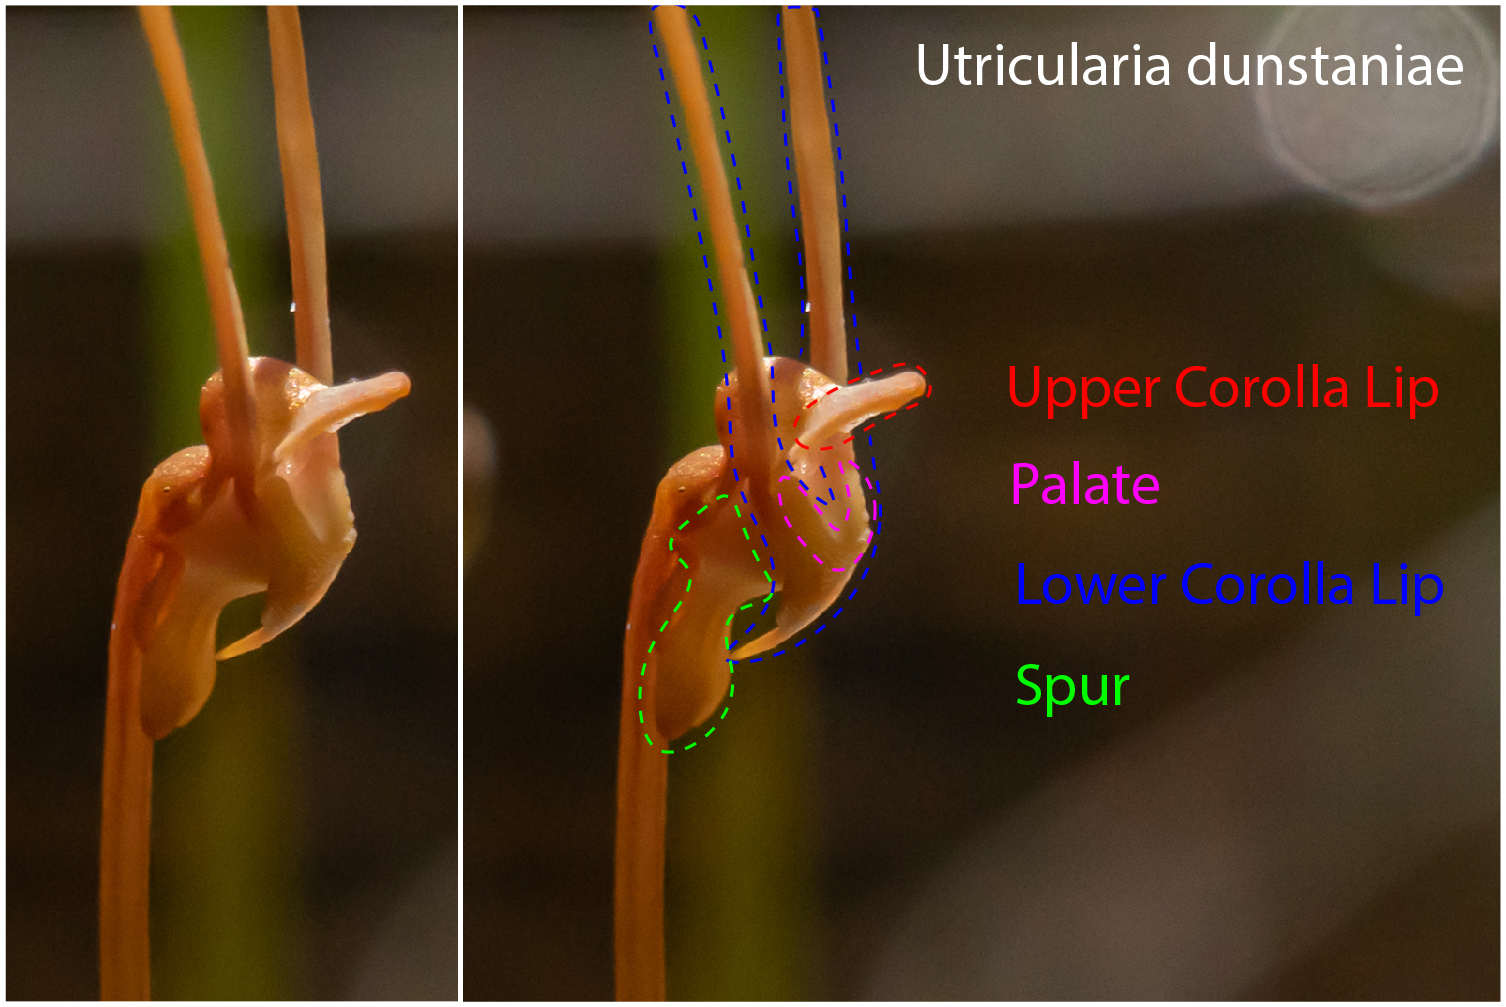 Utricularia floral morphology – a pictorial glossary of terms